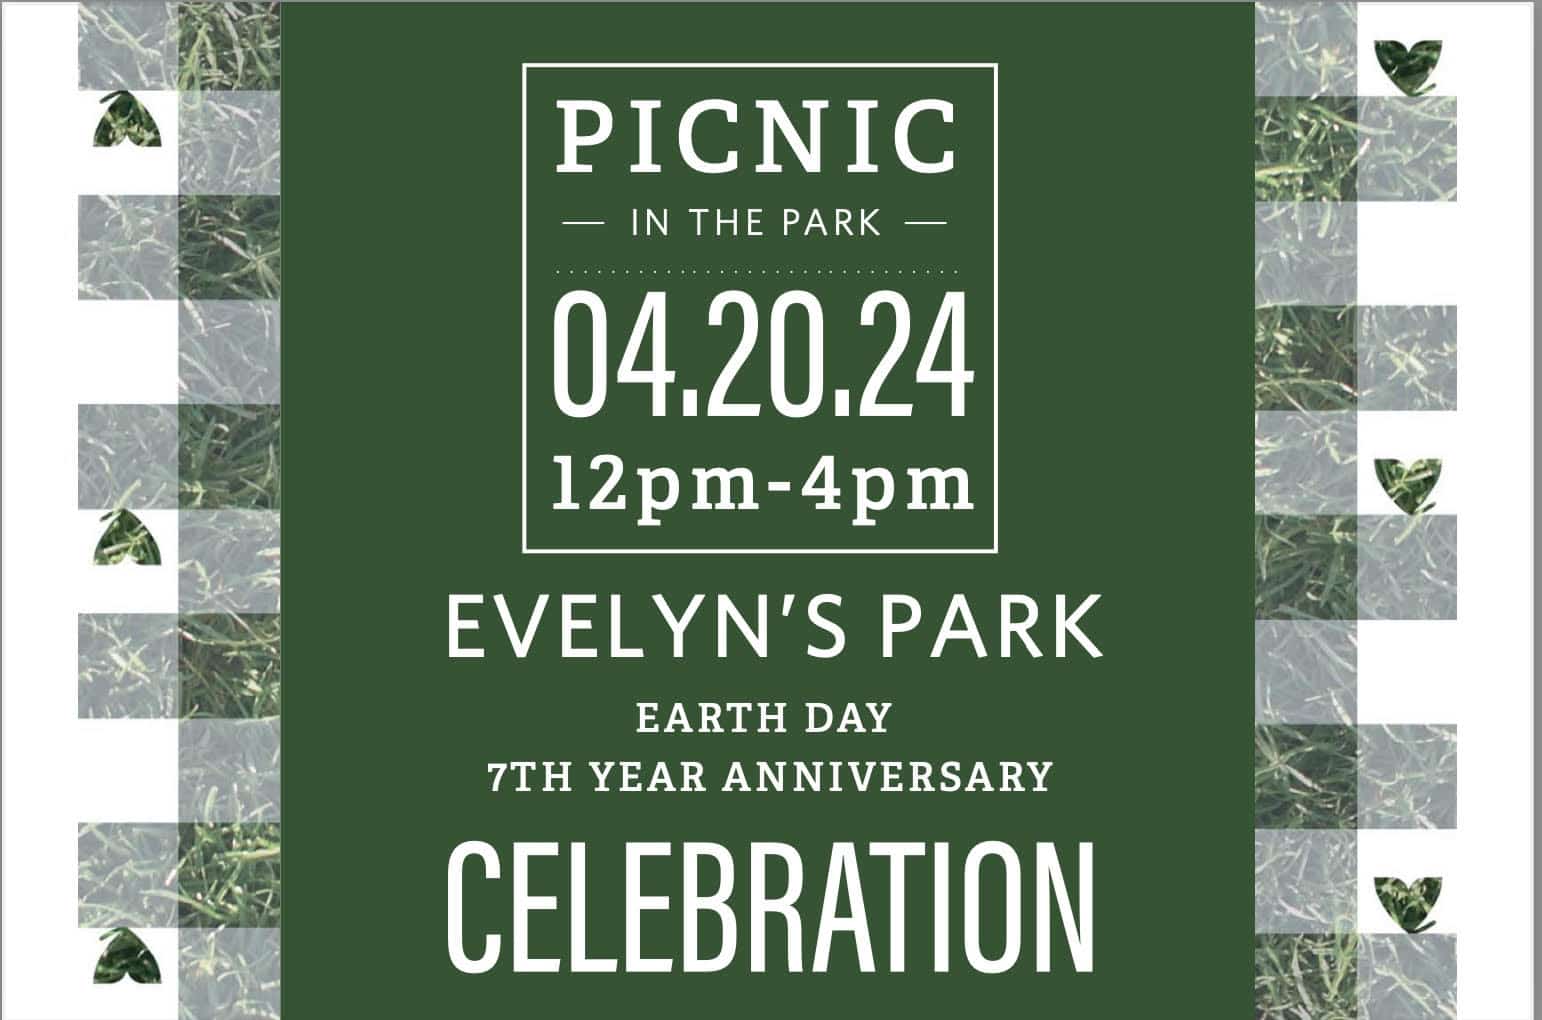 Picnic in the Park Earth Day 2024 Celebration at Evelyn's Park Conservancy